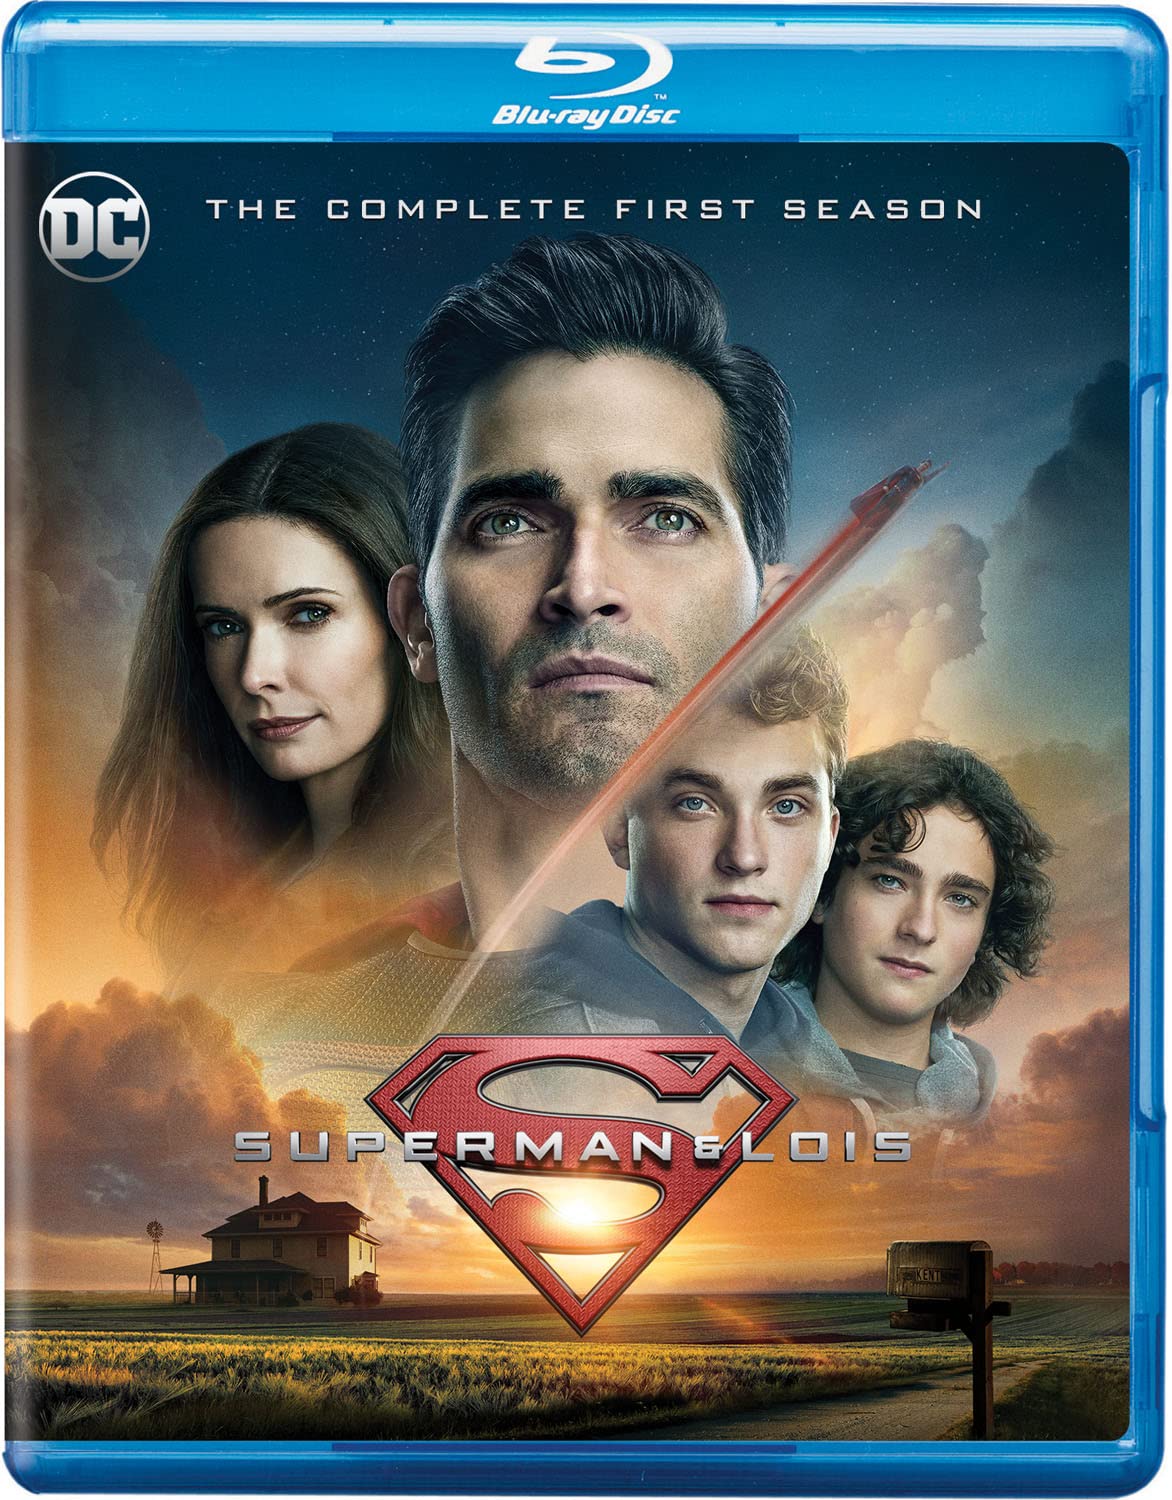 Superman & Lois: The Complete First Season (Box Set) - Blu-ray [ 2021 ]  - Drama Television On Blu-ray - TV Shows On GRUV